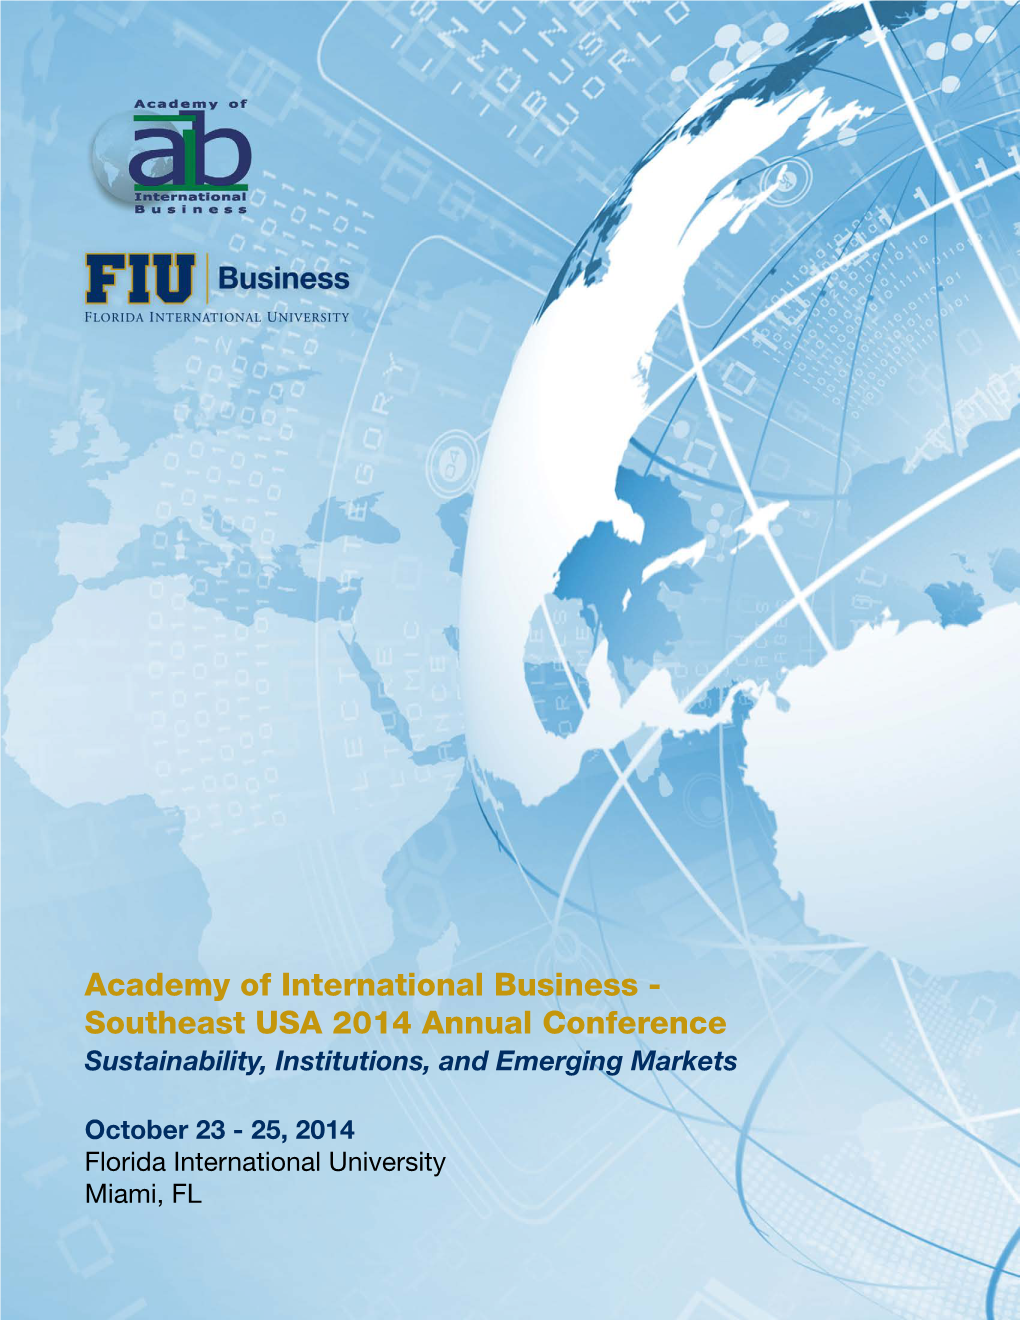 Academy of International Business - Southeast USA 2014 Annual Conference Sustainability, Institutions, and Emerging Markets